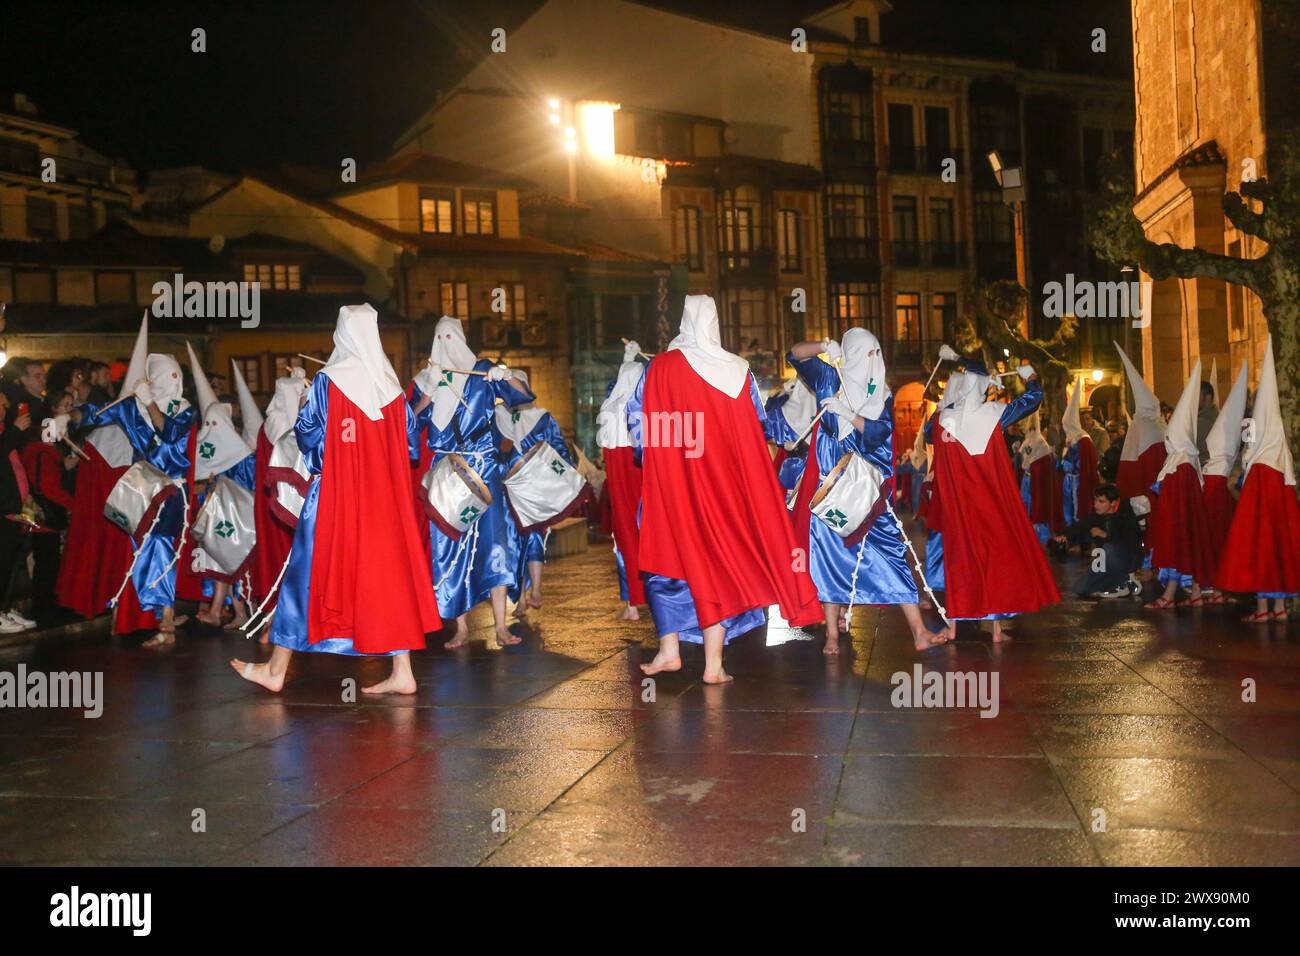 Avilés, Spain, March 28, 2024: The music band of the Brotherhood of San Juan Evangelista playing during the Procession of Silence, on March 28, 2024, in Avilés, Spain. Credit: Alberto Brevers / Alamy Live News. Stock Photo